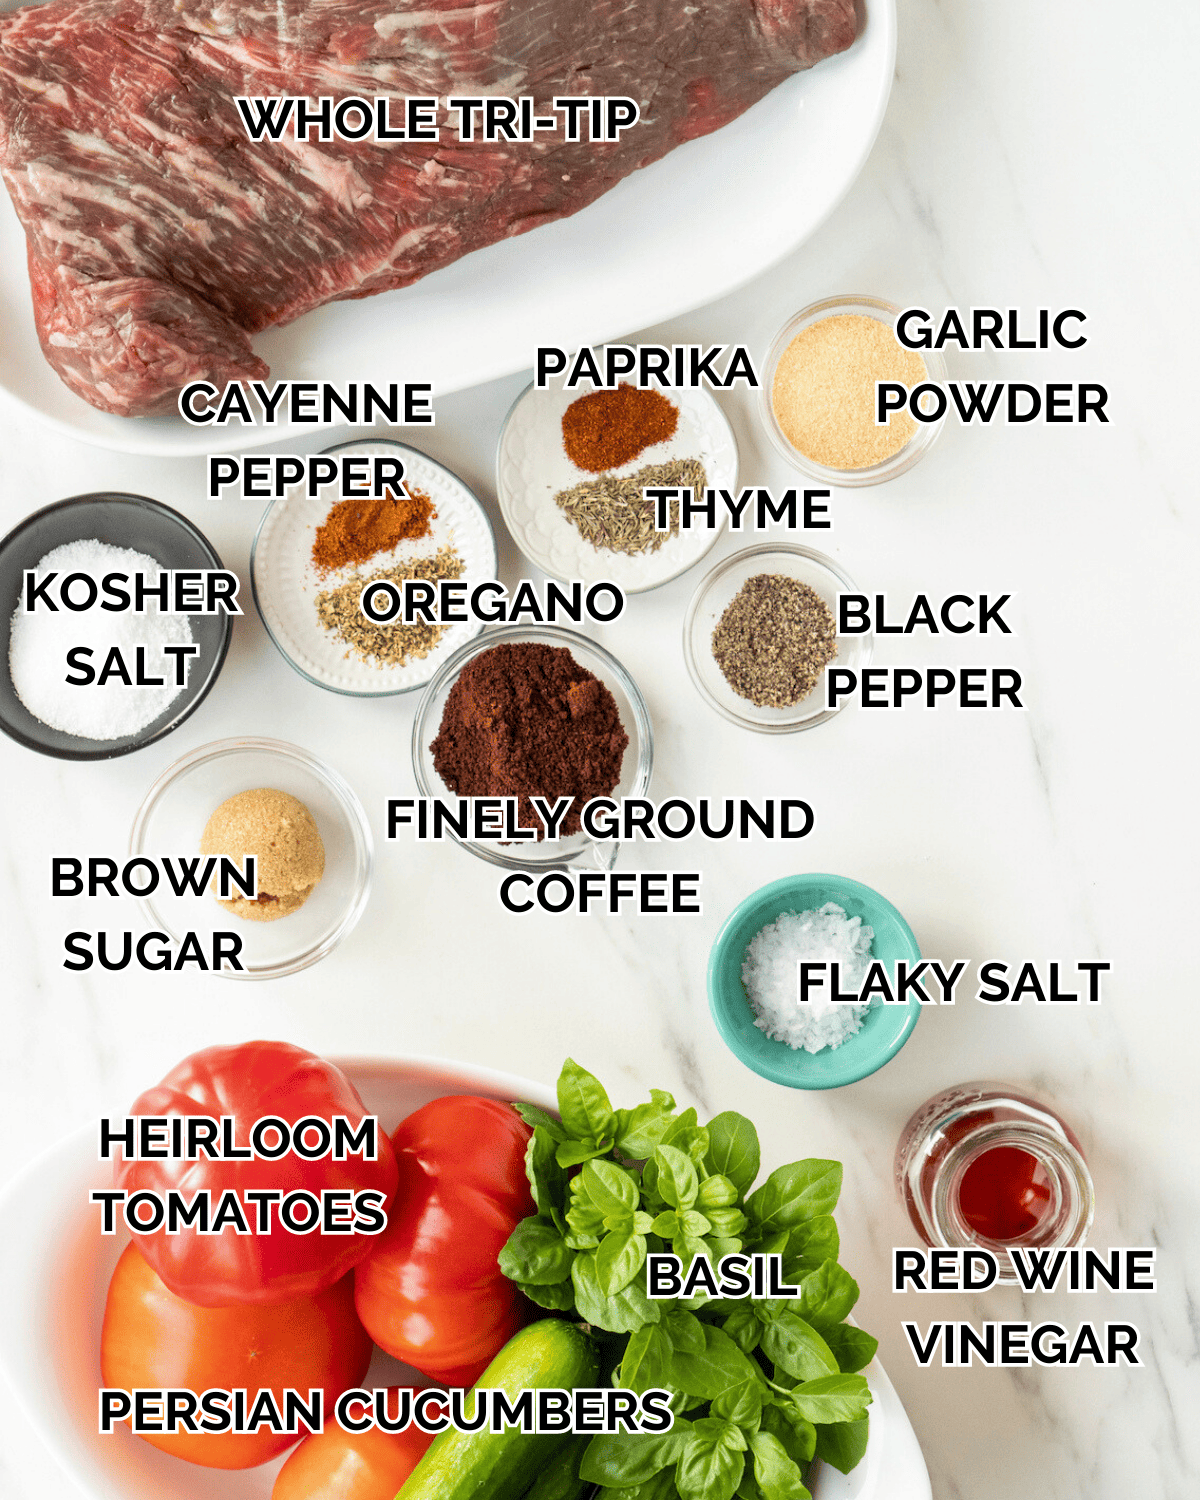 An overhead shot of all the individual ingredients for the recipe.  Ingredients consists of whole tri-tip, cayenne pepper, oregano, salt, paprika, thyme, garlic powder, brown sugar, ground coffee, black pepper, flaky salt, heirloom tomatoes, basil, red wine vinegar, and Persian cucumbers.  